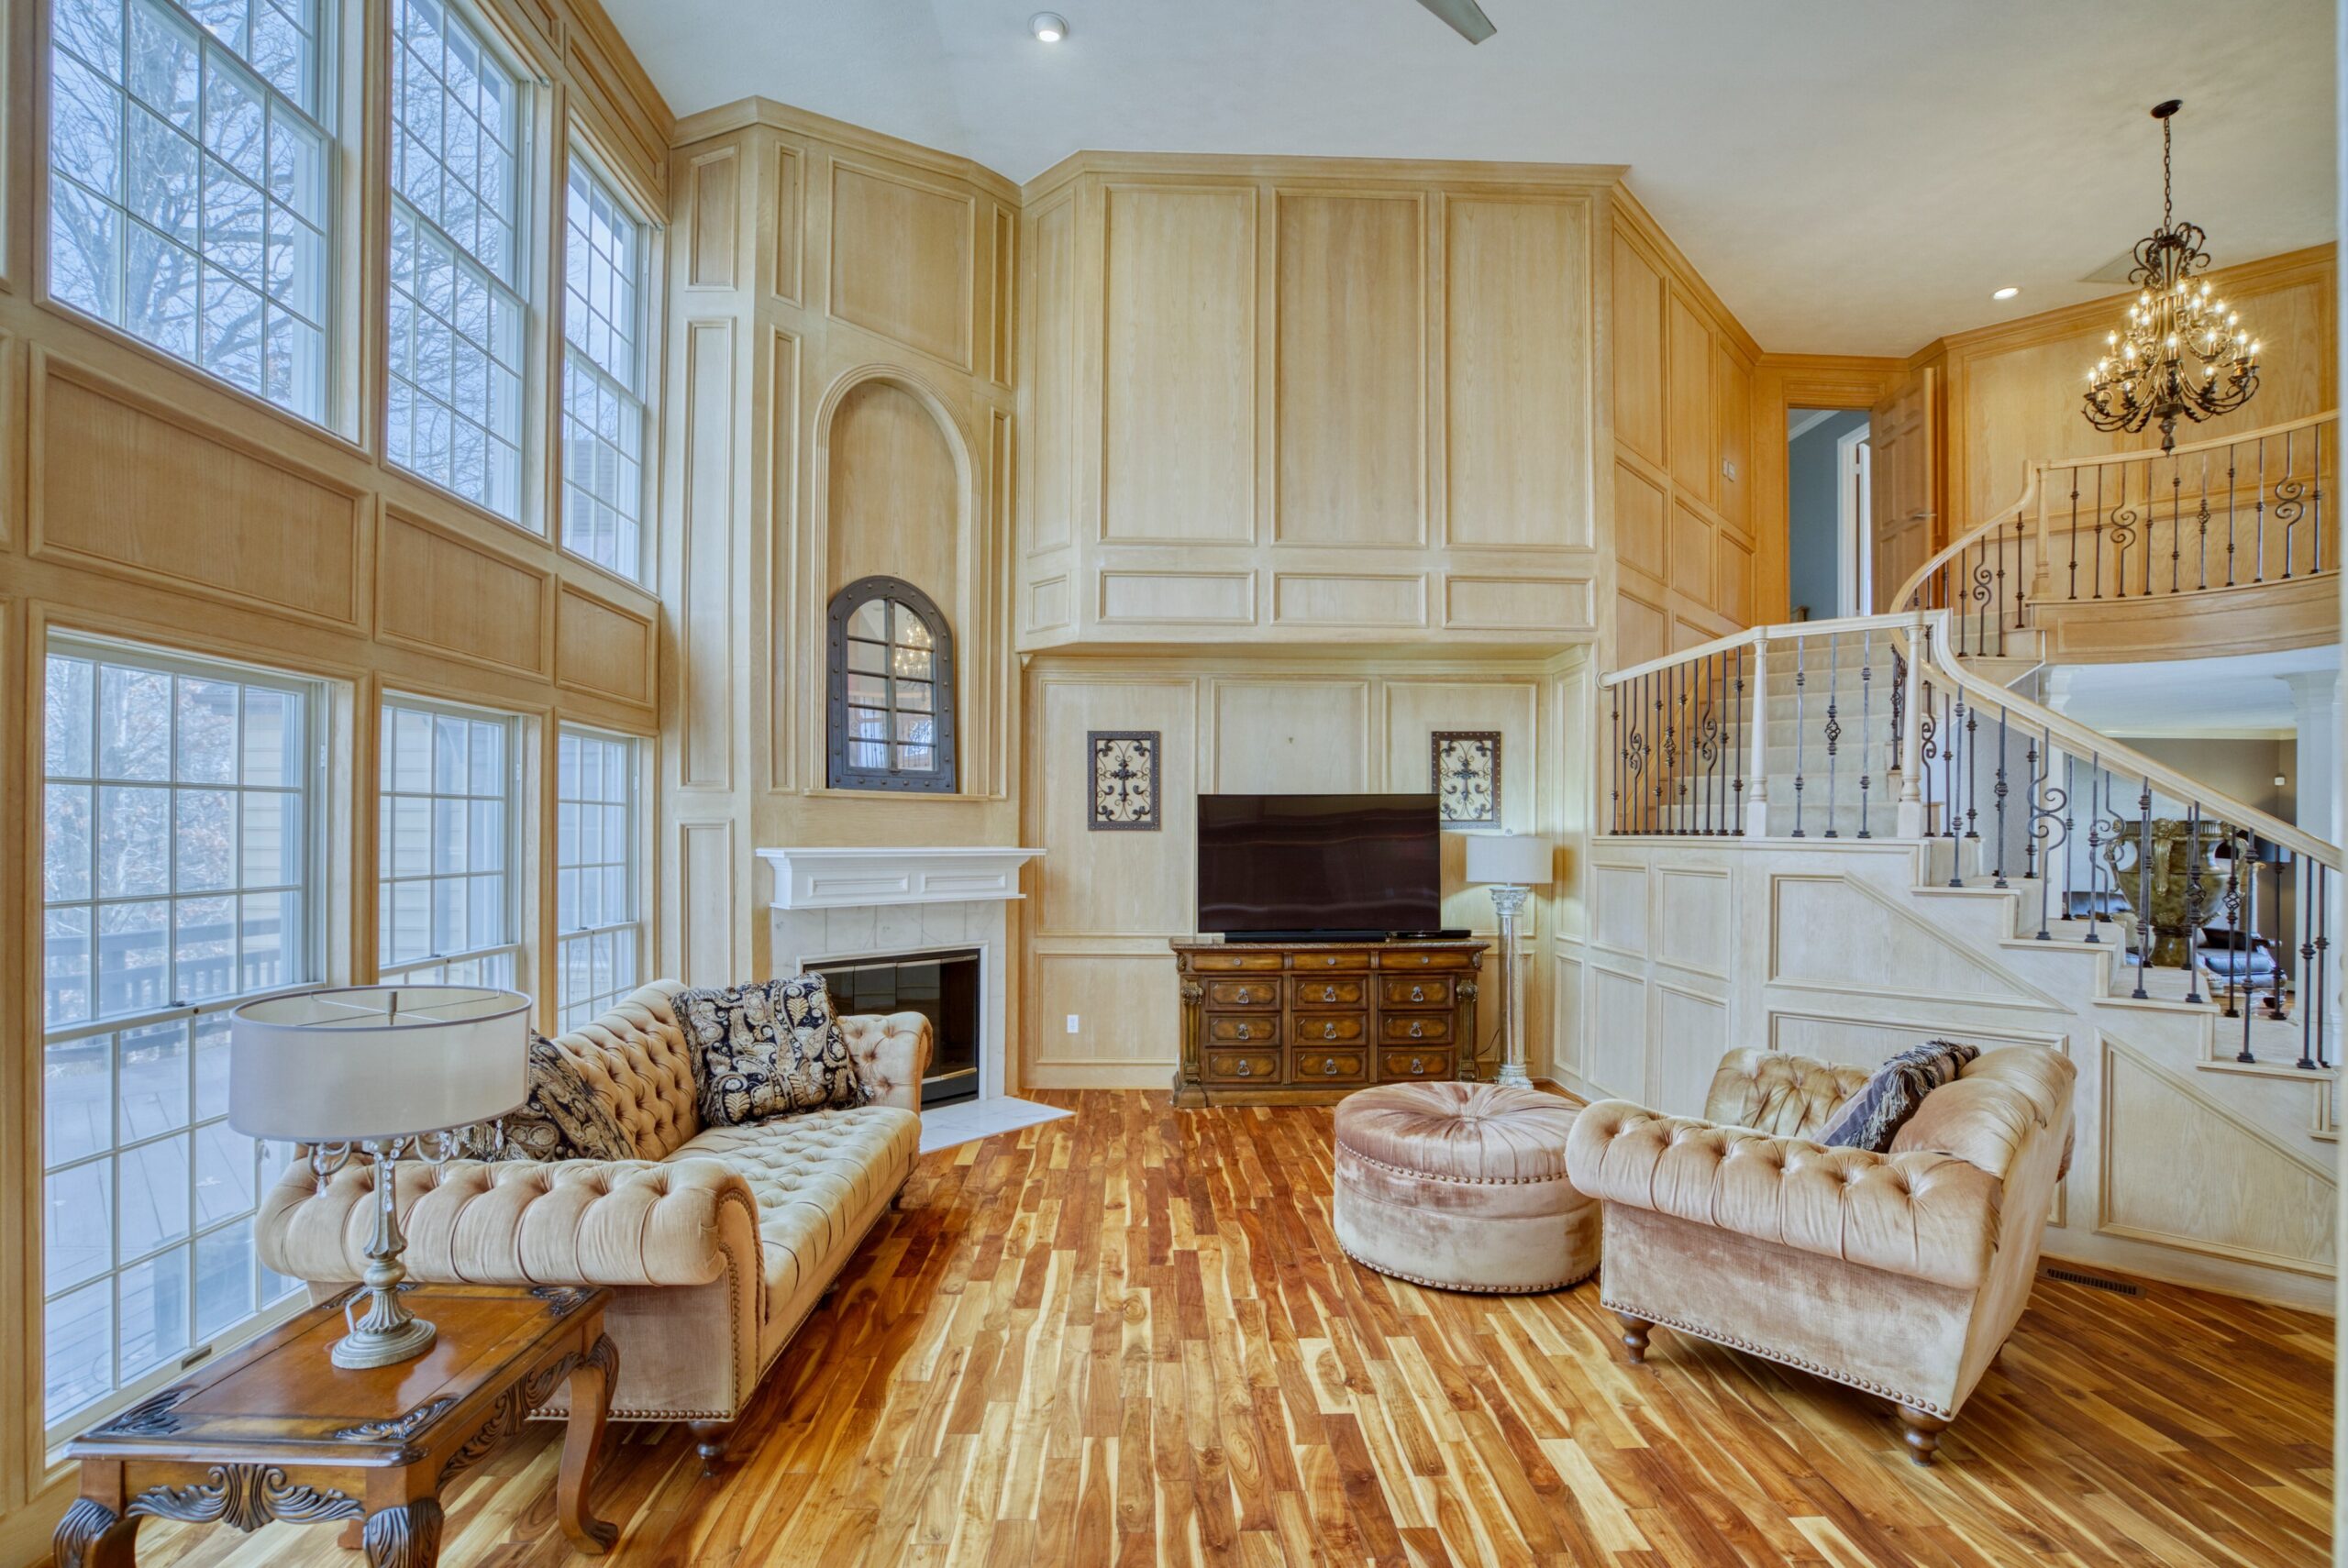 Interior professional photo of 21024 Starflower Way in Ashburn, VA - showing the 2-story grand living room with custom wood paneled walls